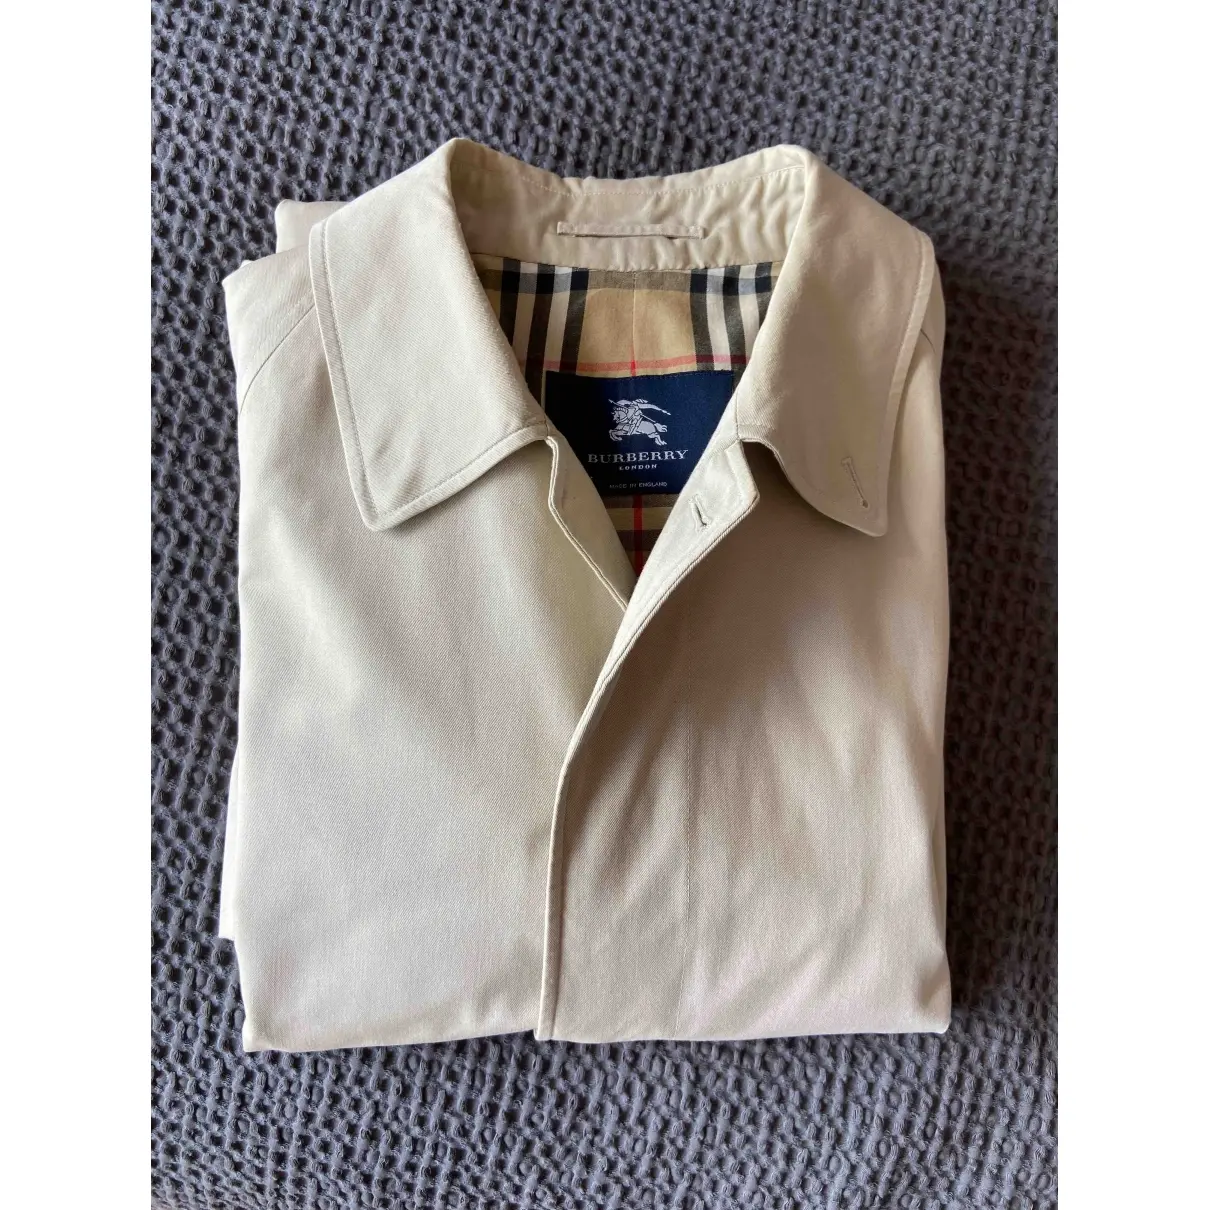 Burberry Trenchcoat for sale